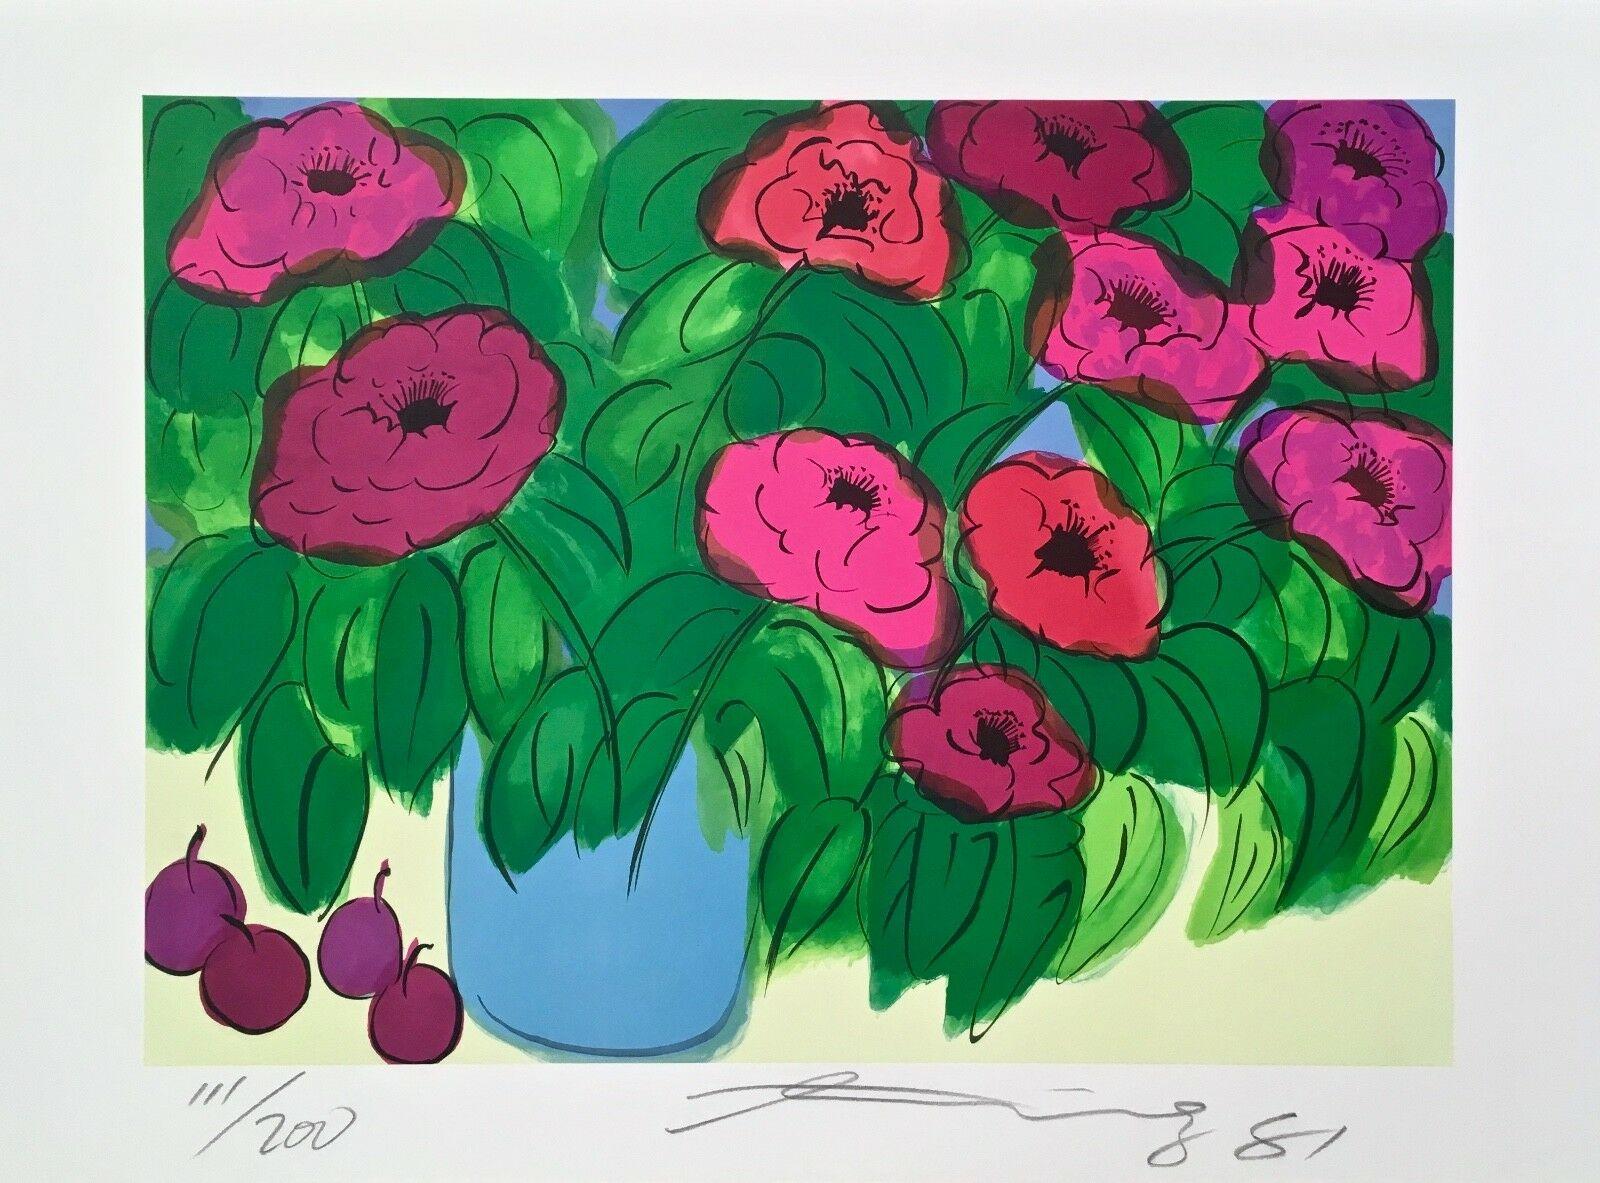 Artist: Walasse Ting (1929-2010)
Title: Flowers
Year: 1981
Edition: 111/200, plus proofs
Medium: Lithograph on Somerset paper
Size: 22 x 30 inches
Condition: Good
Inscription: Signed and numbered by the artist.

WALASSE TING (1929–2010)